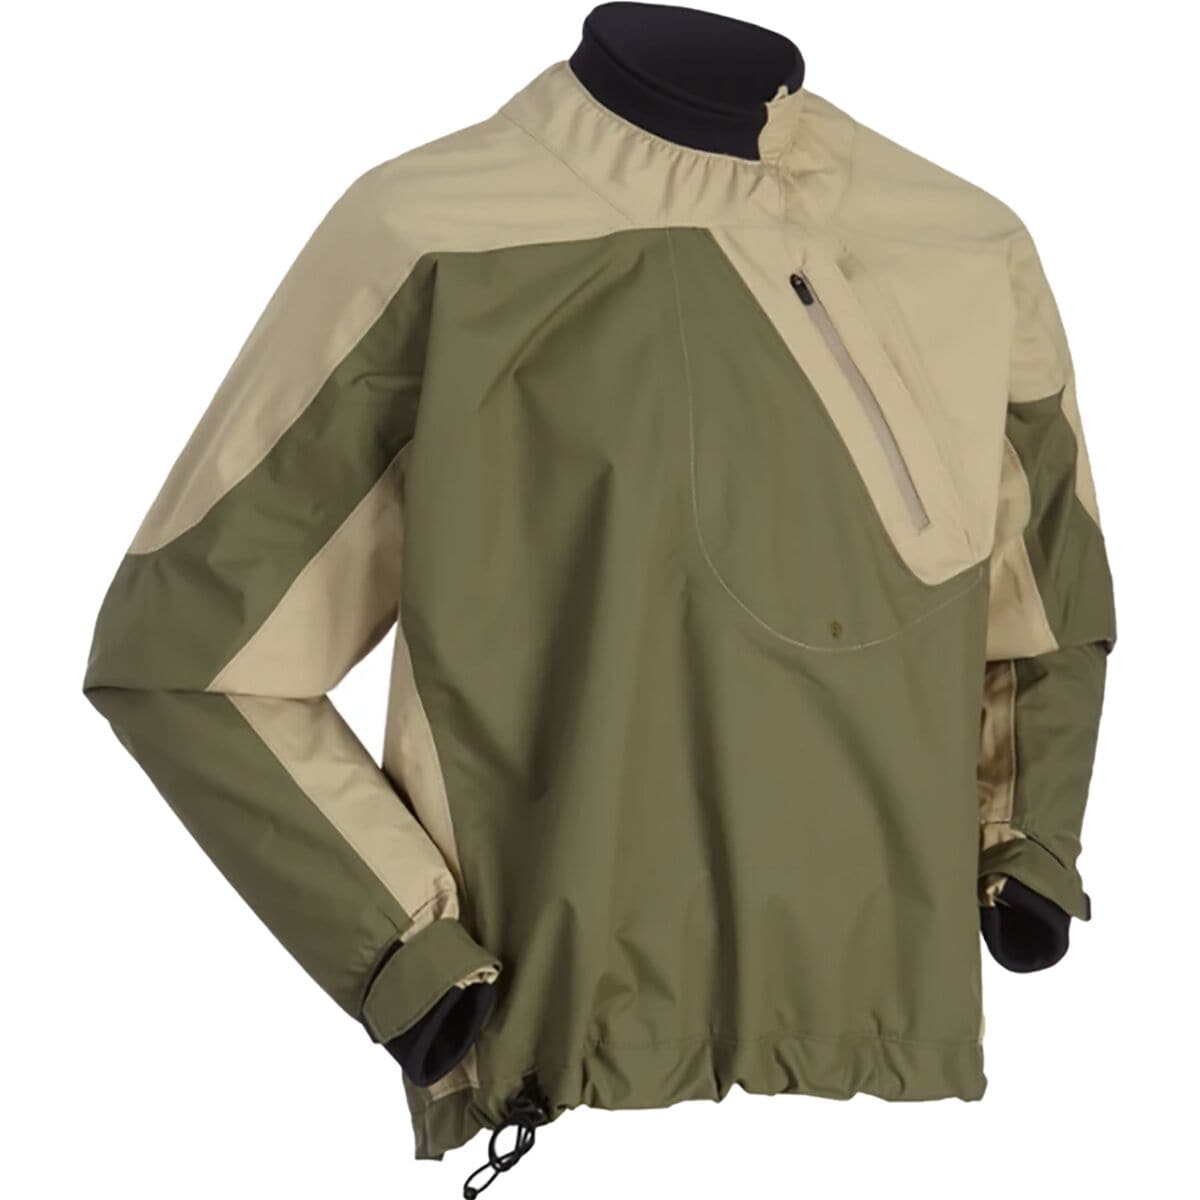 Immersion Research Zephyr Paddling Long-Sleeve Jacket - Men's